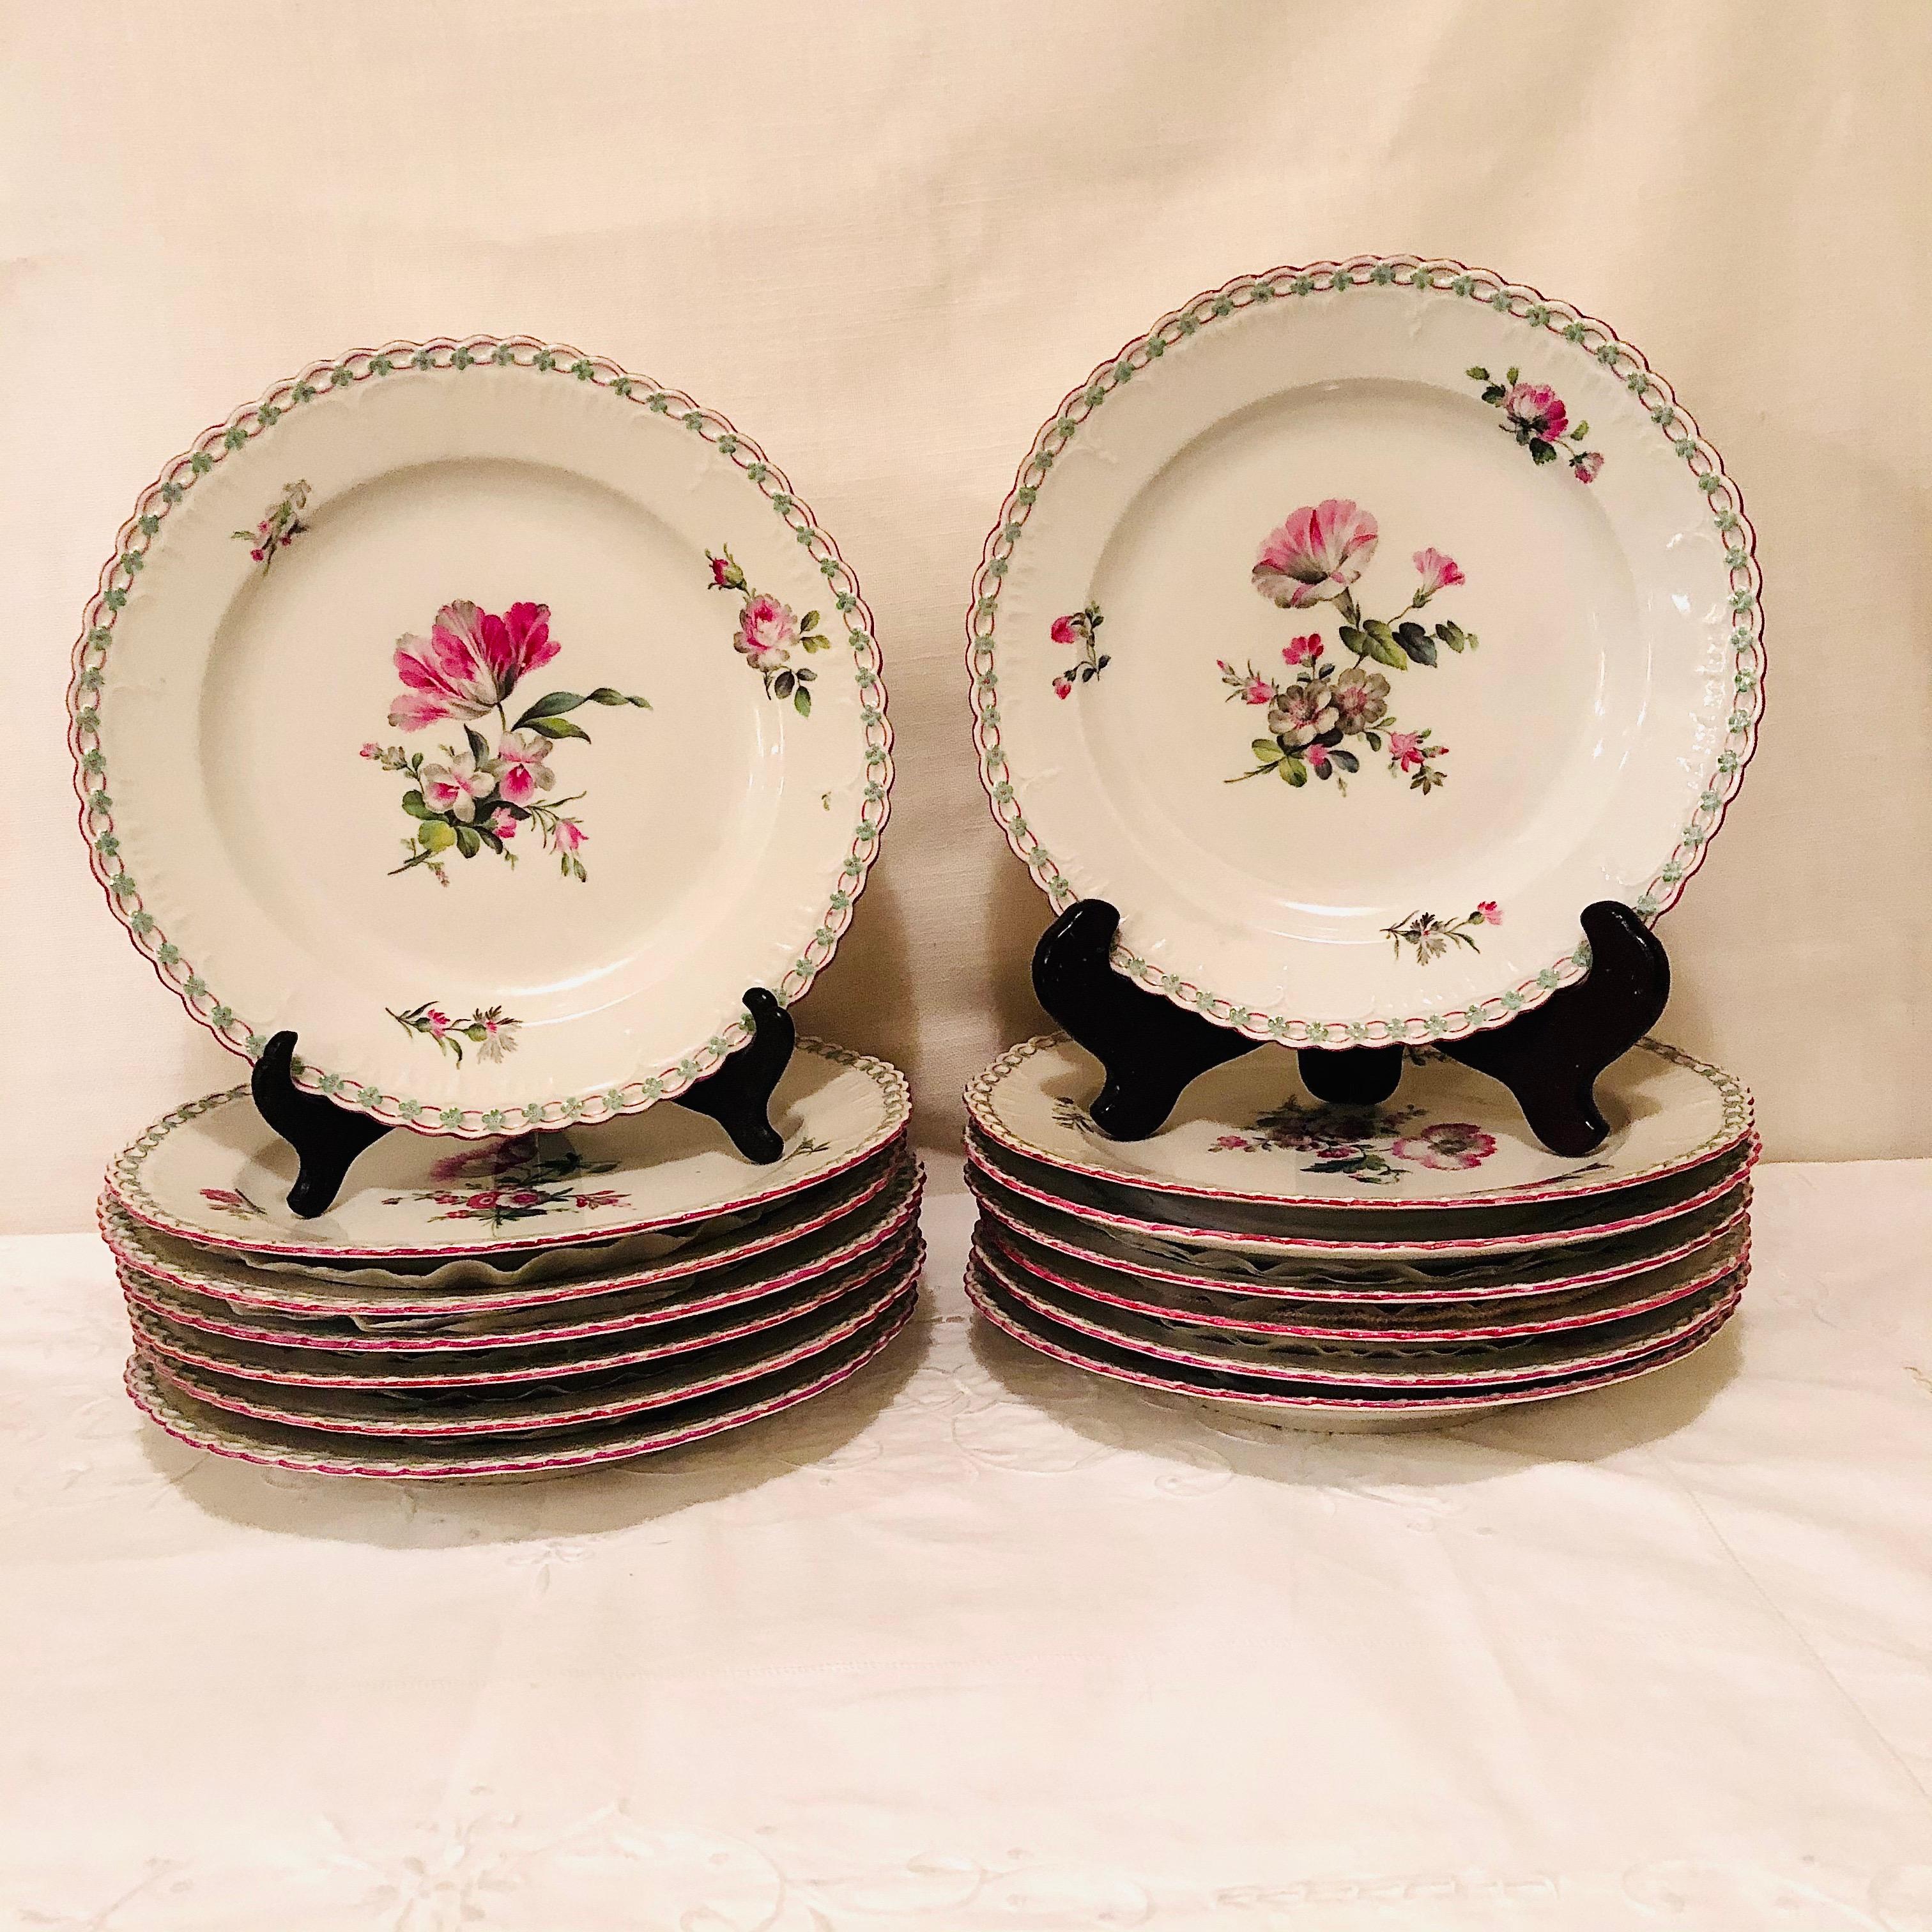 Set of 13 KPM Dinner Plates Each Painted Differently With Raised Forget Me Nots 7